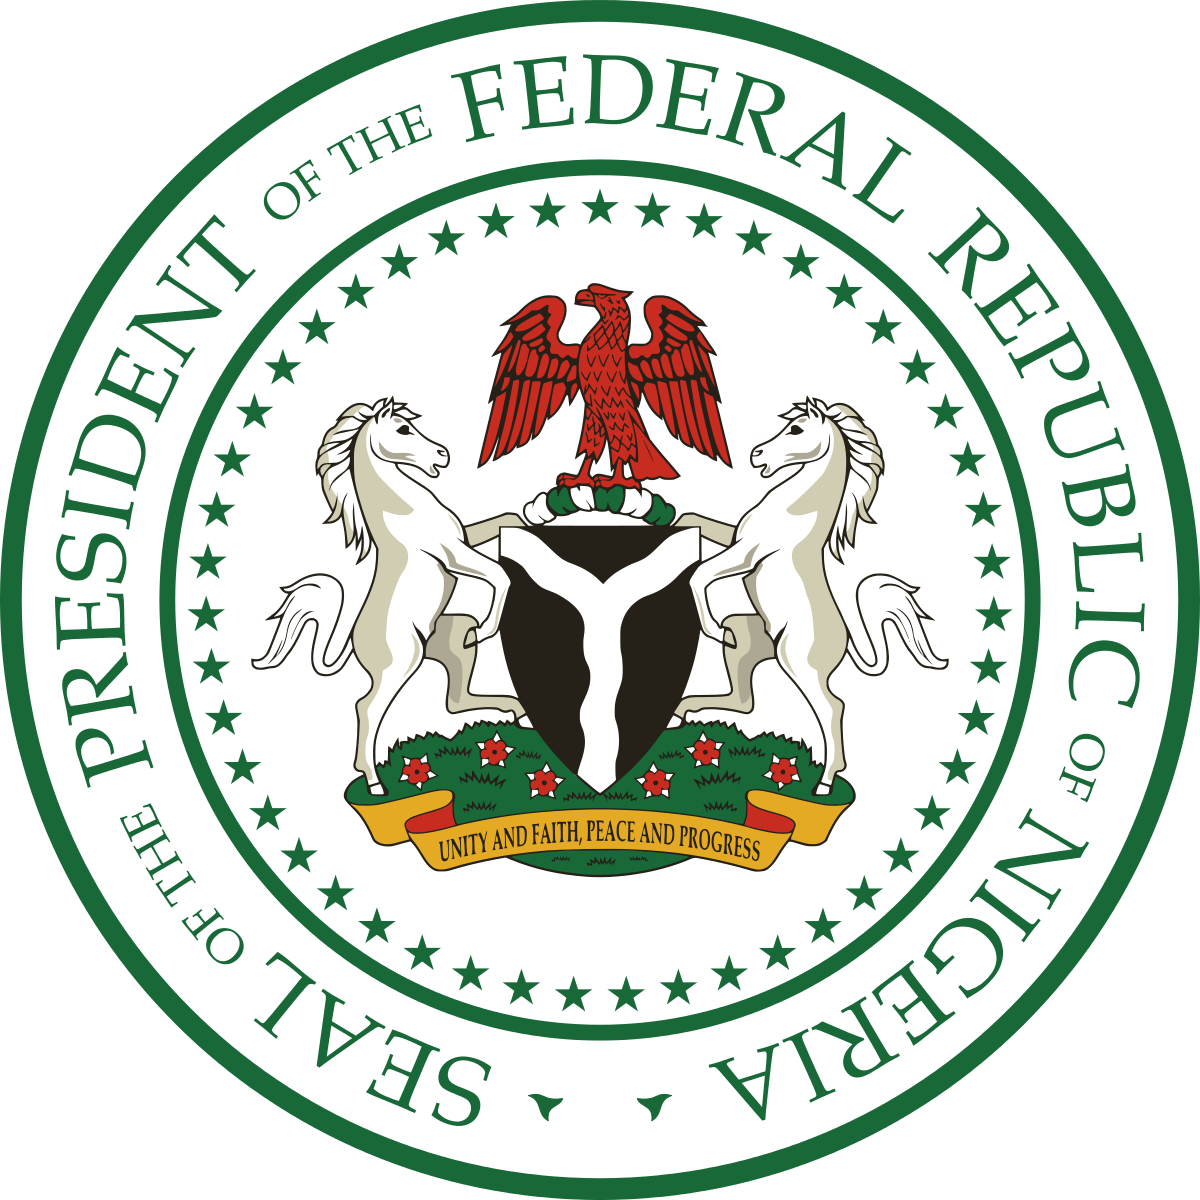 Nigeria: President Tinubu Appoints New Chief Executive Officers in Two Agencies and Directs Outgoing National Identity Management Commission (NIMC) Director General/ Chief Executive Officer to Commence 90-Day Preretirement Leave